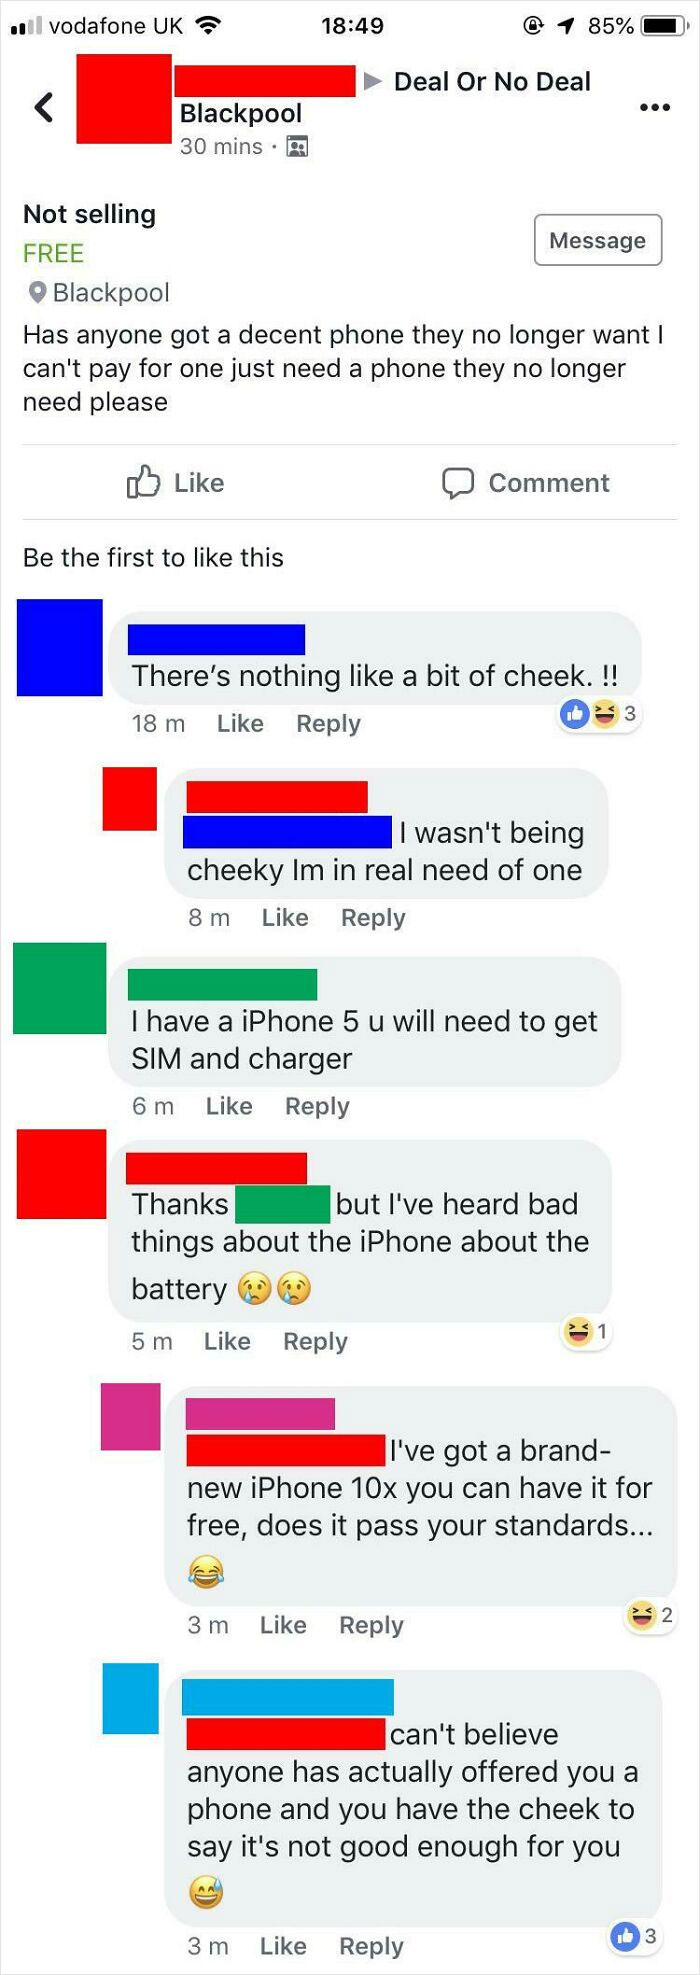 Asking For A Free Mobile Phone, And Then Rejecting An Offer